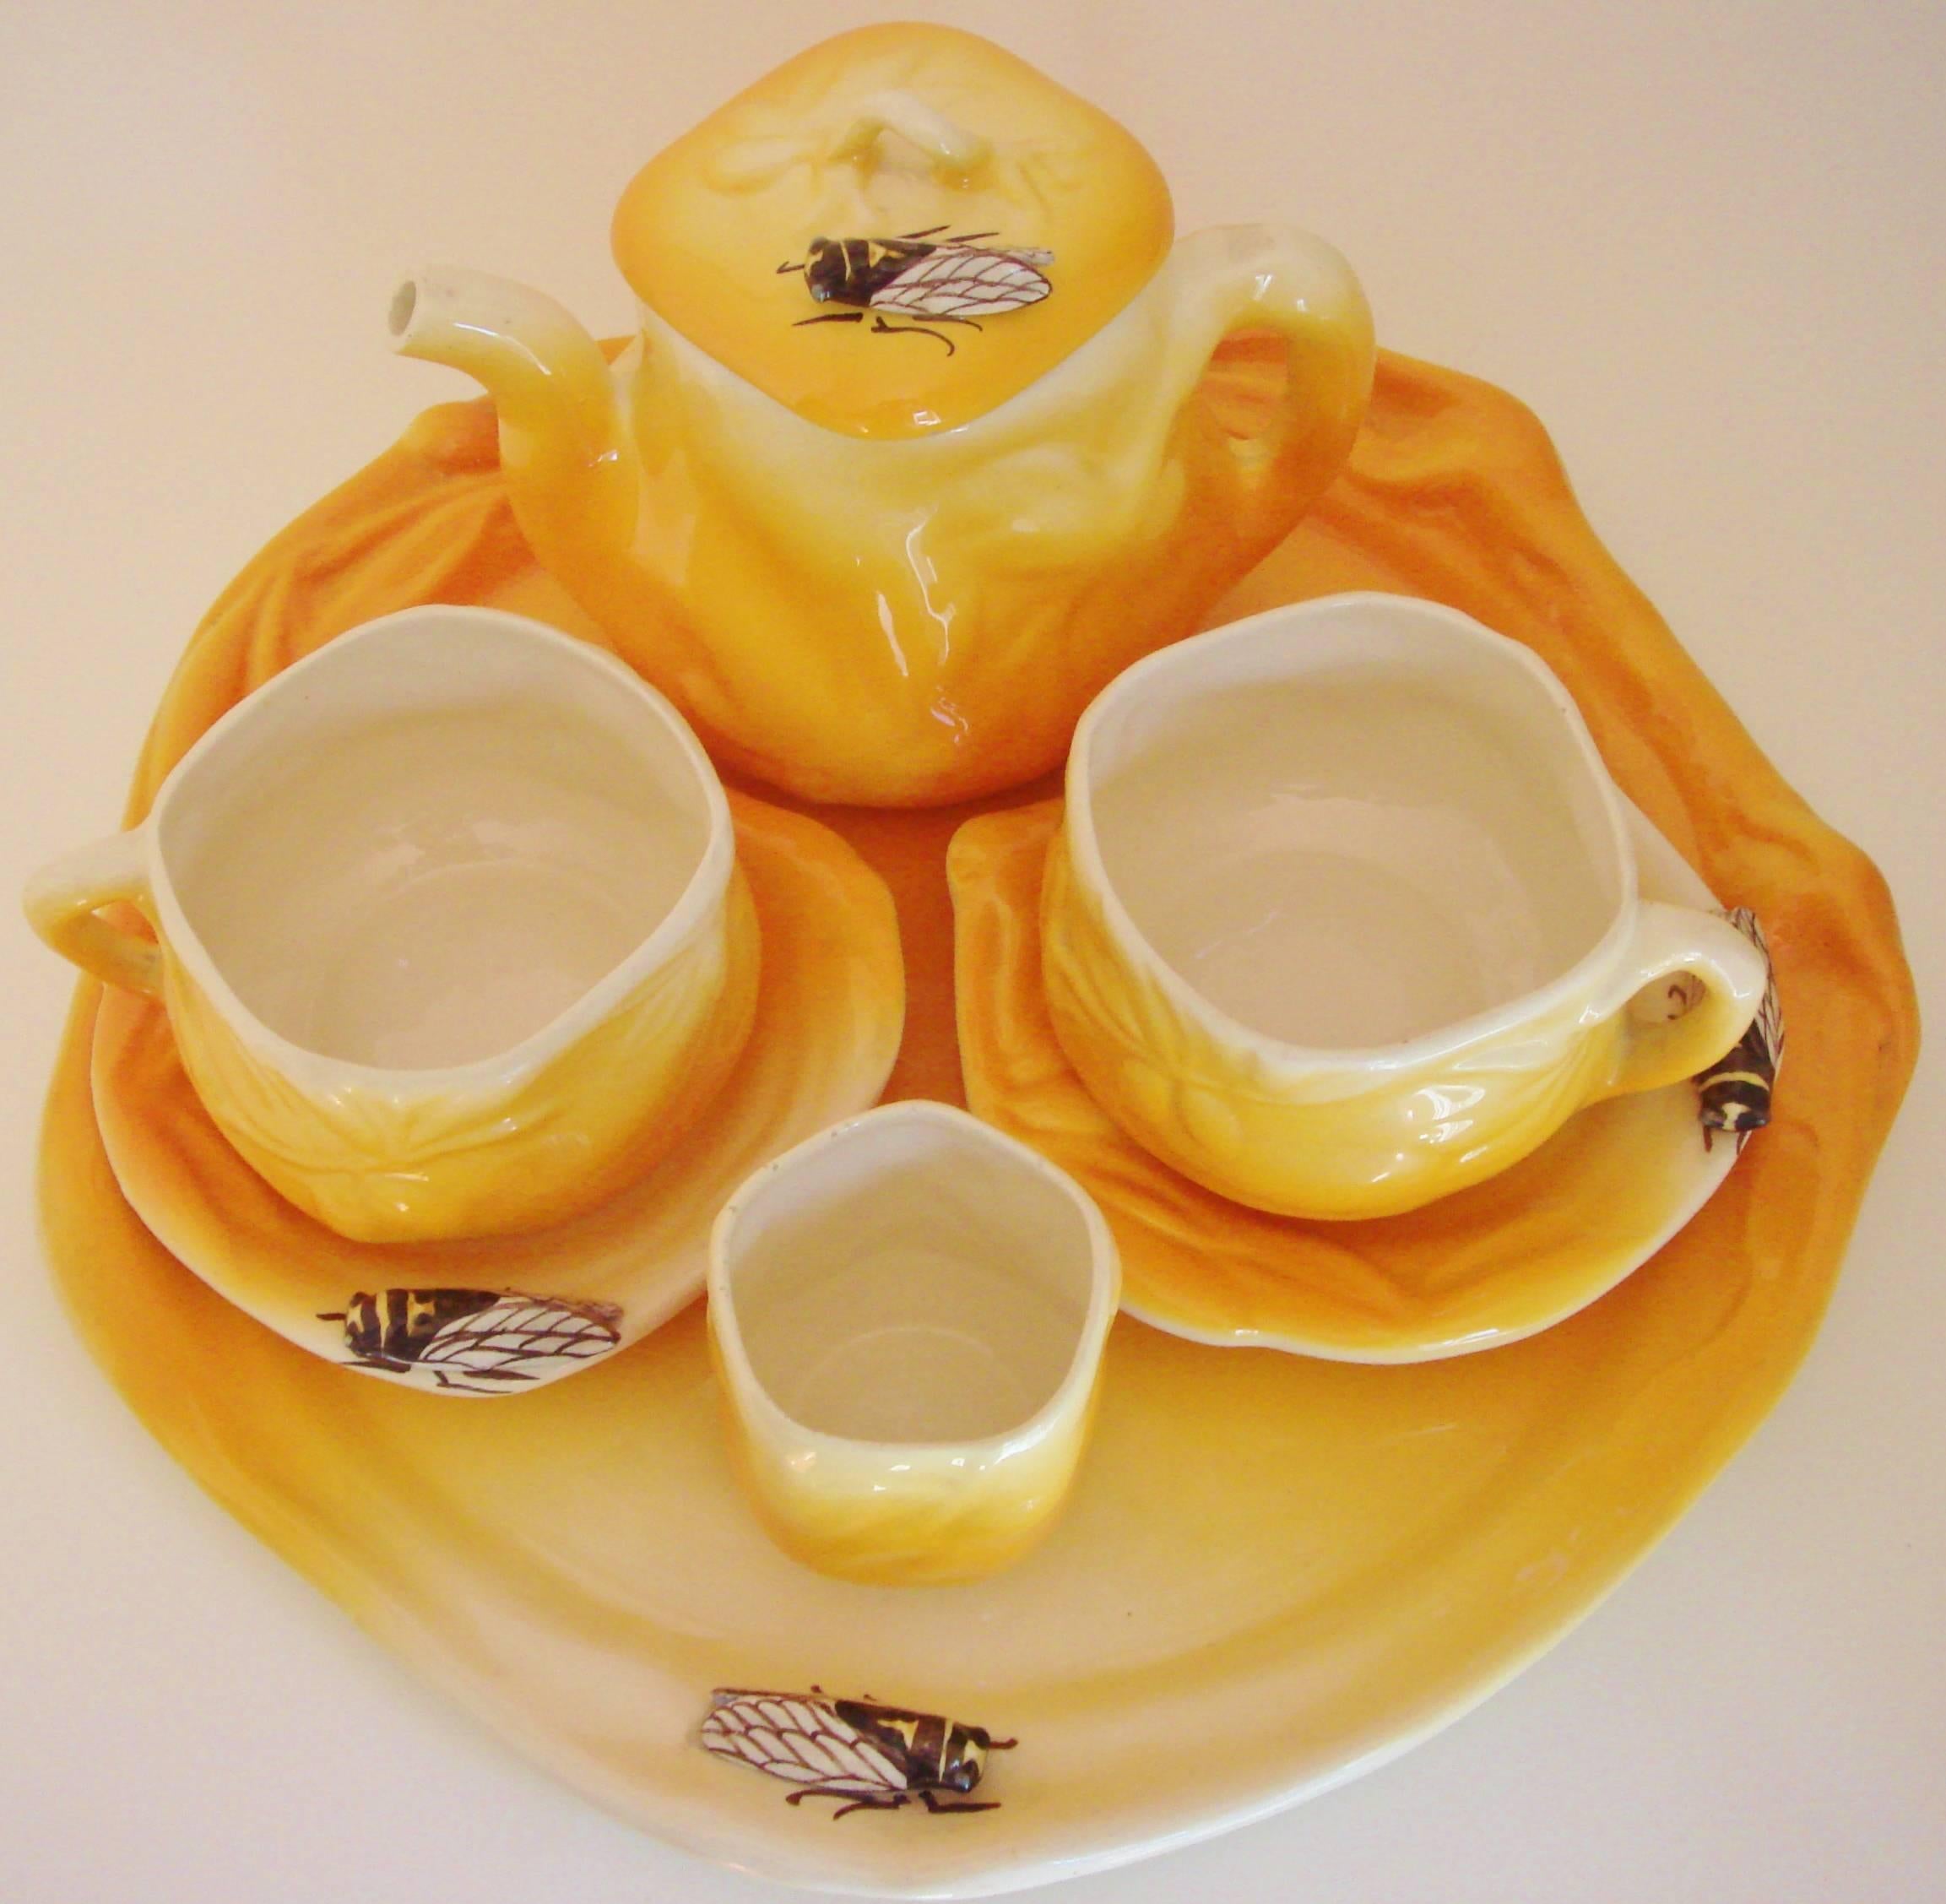 This fabulous Provençal French Mid-Century five-piece faience cafe-au-lait set is by master ceramicist, Louis Sicard of Vallaurice. All of the pieces feature a relief pattern of olive laden branches and are glazed in the brilliant yellow or orange